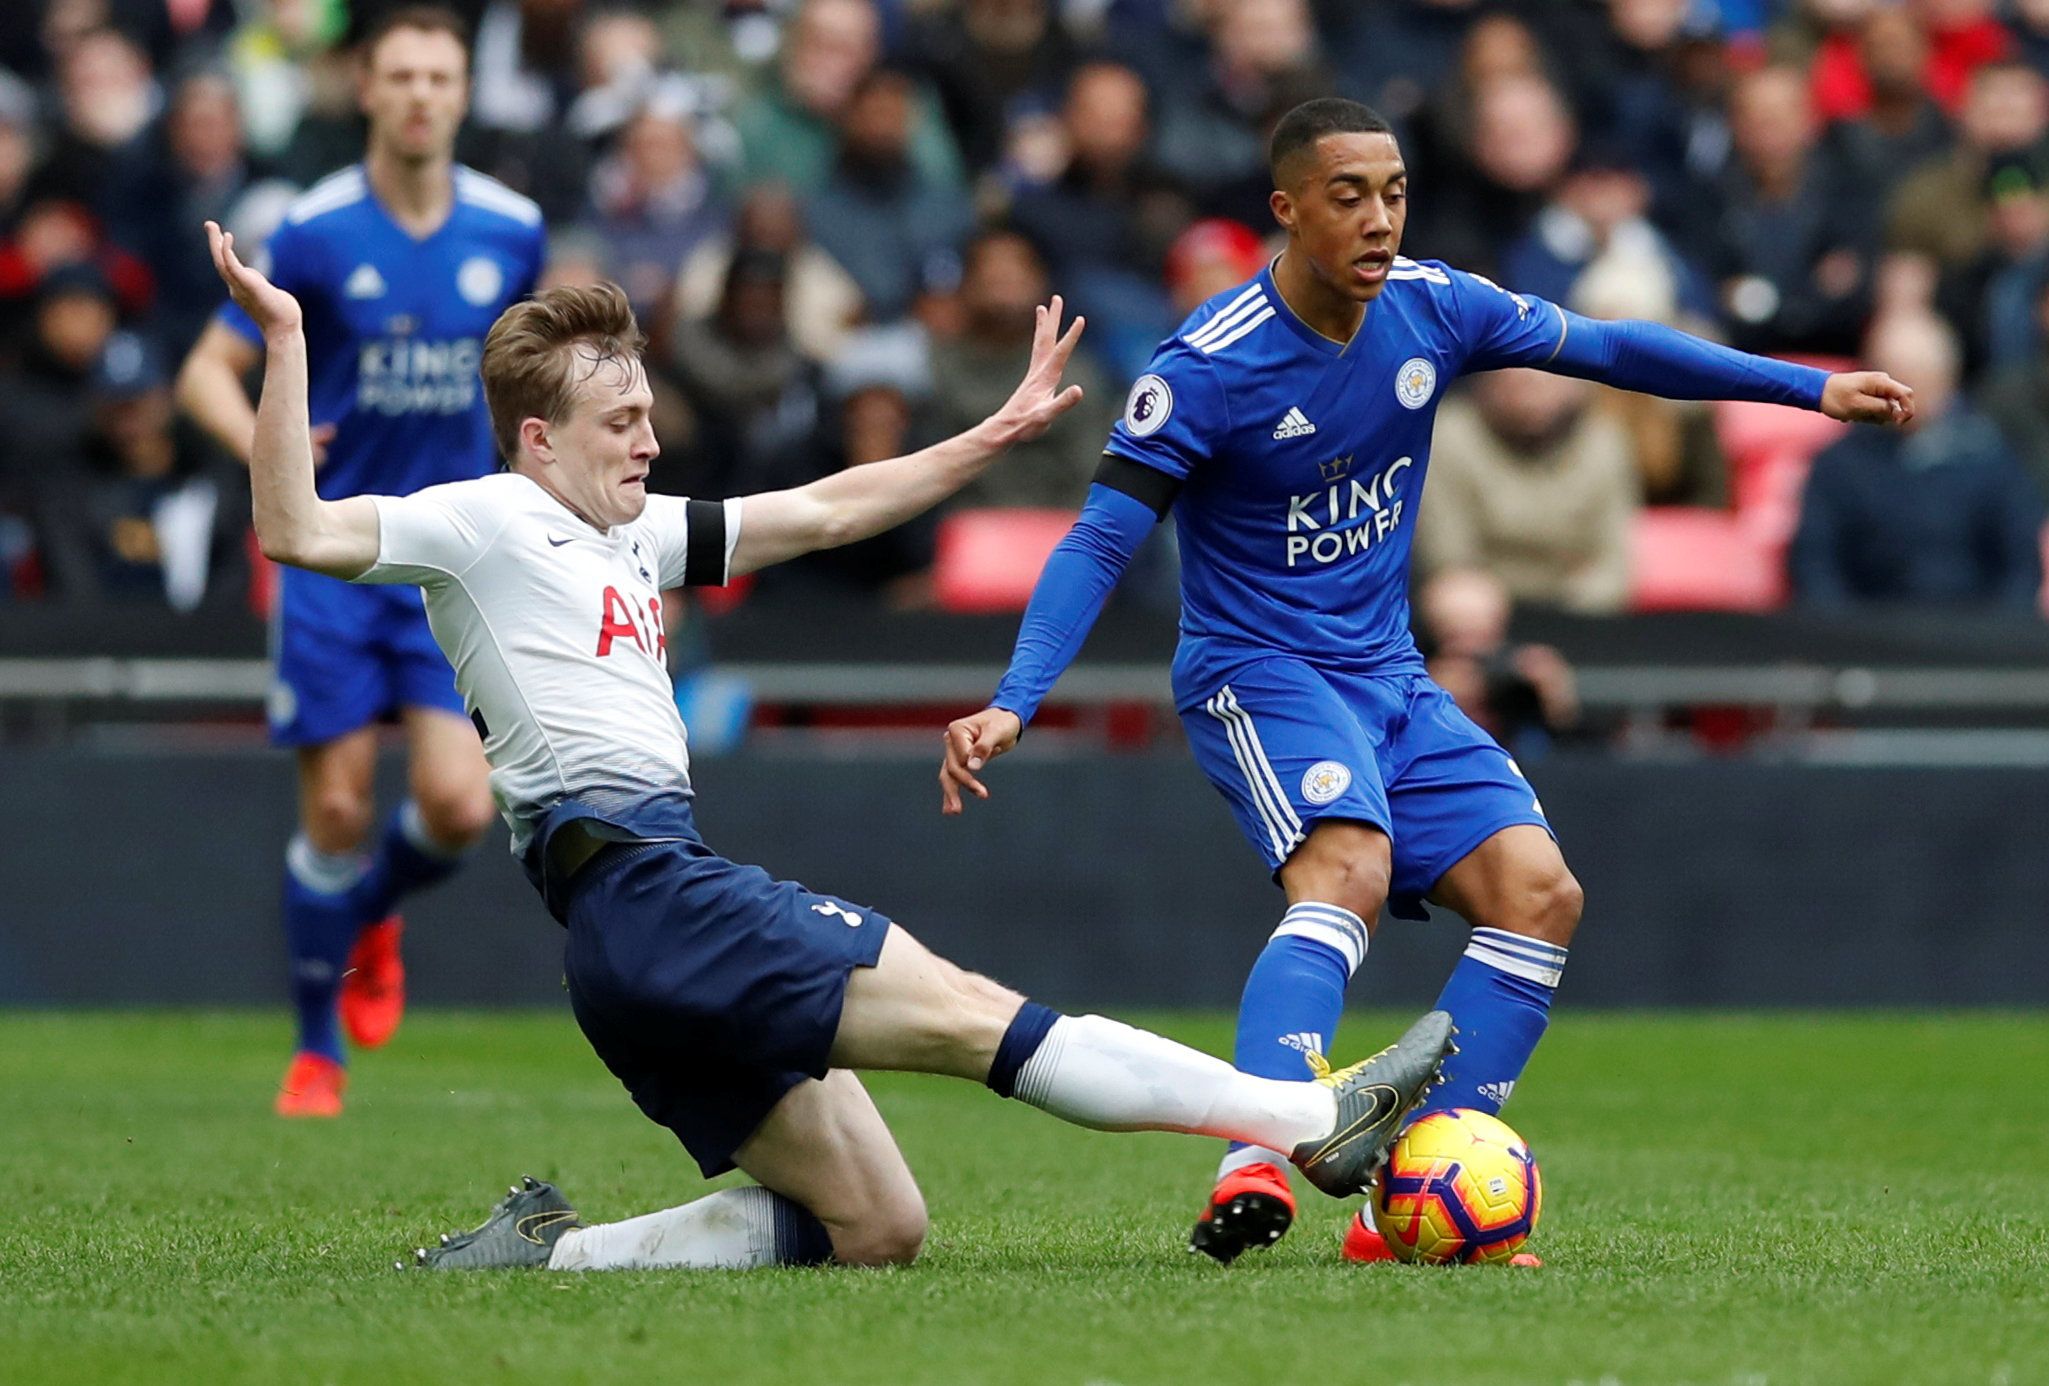 Soccer Football - Premier League - Tottenham Hotspur v Leicester City - Wembley Stadium, London, Britain - February 10, 2019  Tottenham's Oliver Skipp in action with Leicester City's Youri Tielemans   REUTERS/David Klein  EDITORIAL USE ONLY. No use with unauthorized audio, video, data, fixture lists, club/league logos or 